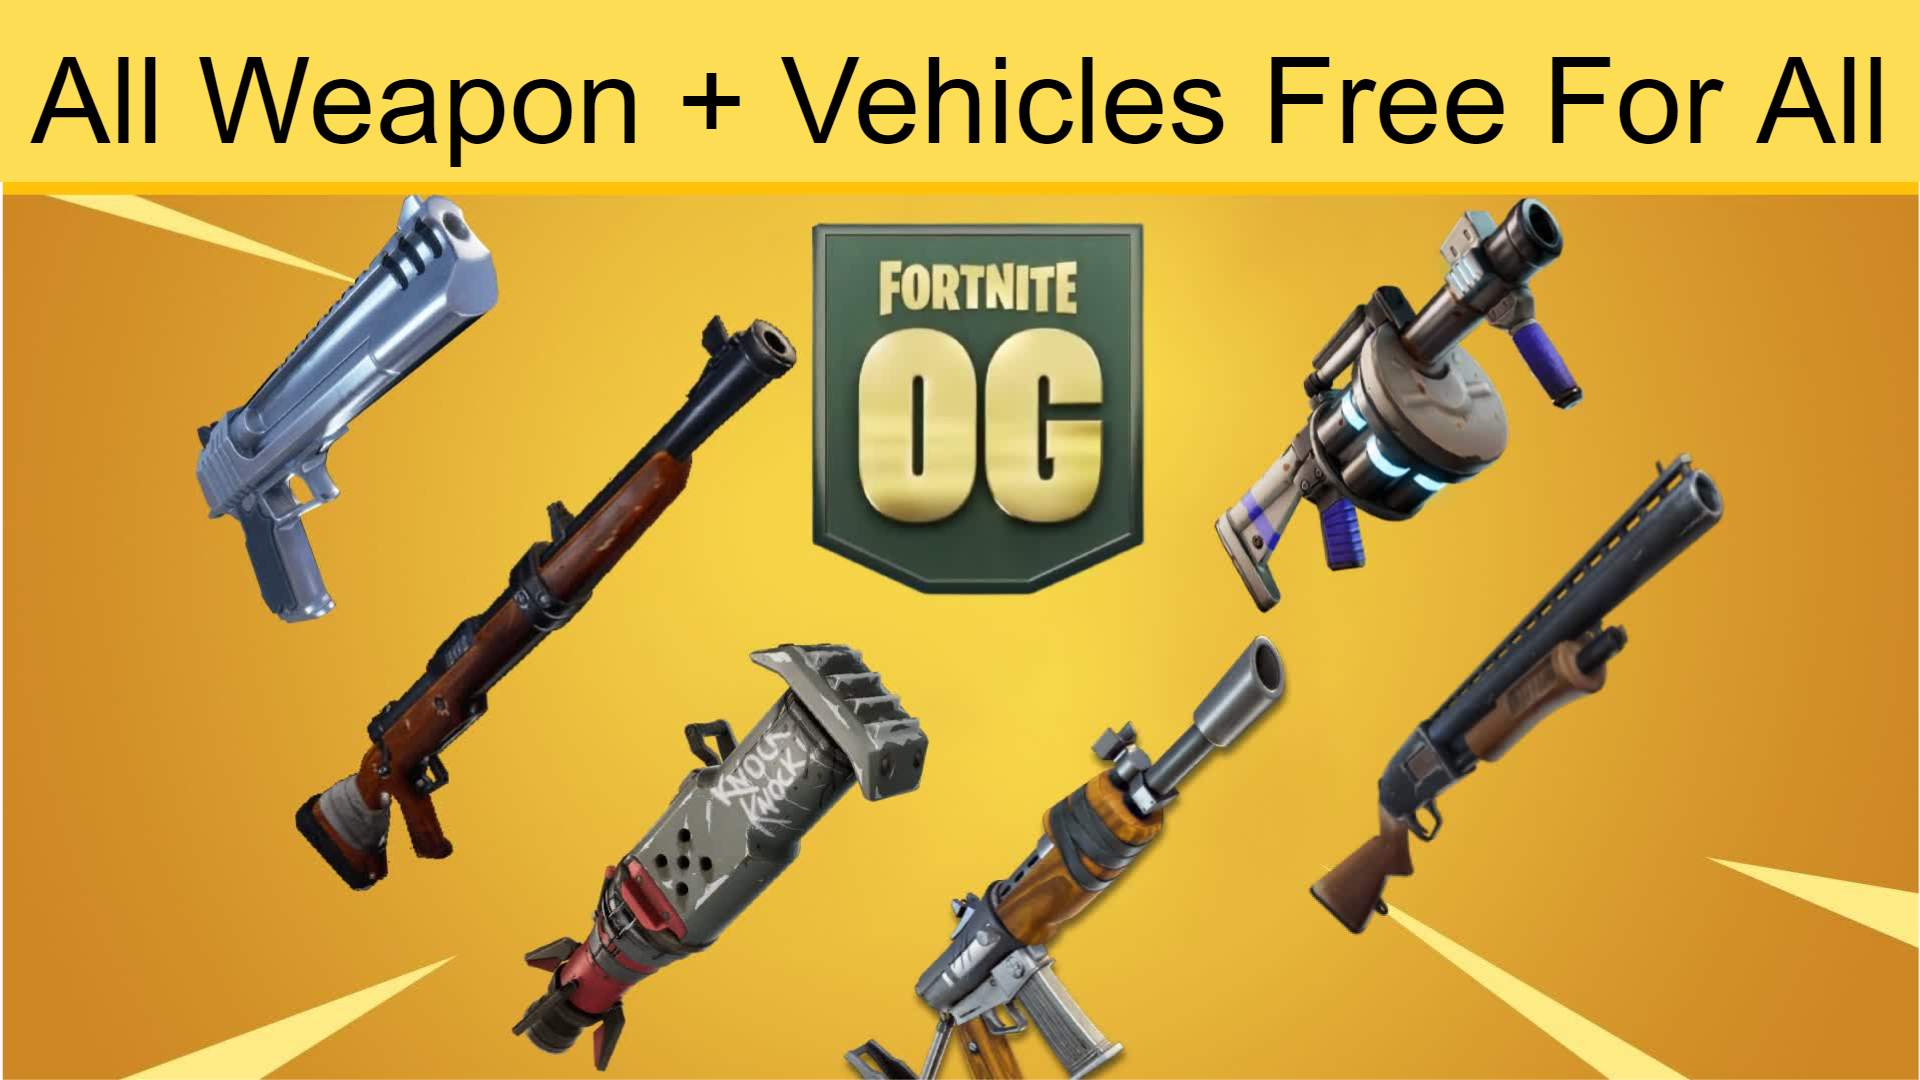 ALL WEAPONS + VEHICLES - FREE FOR ALL